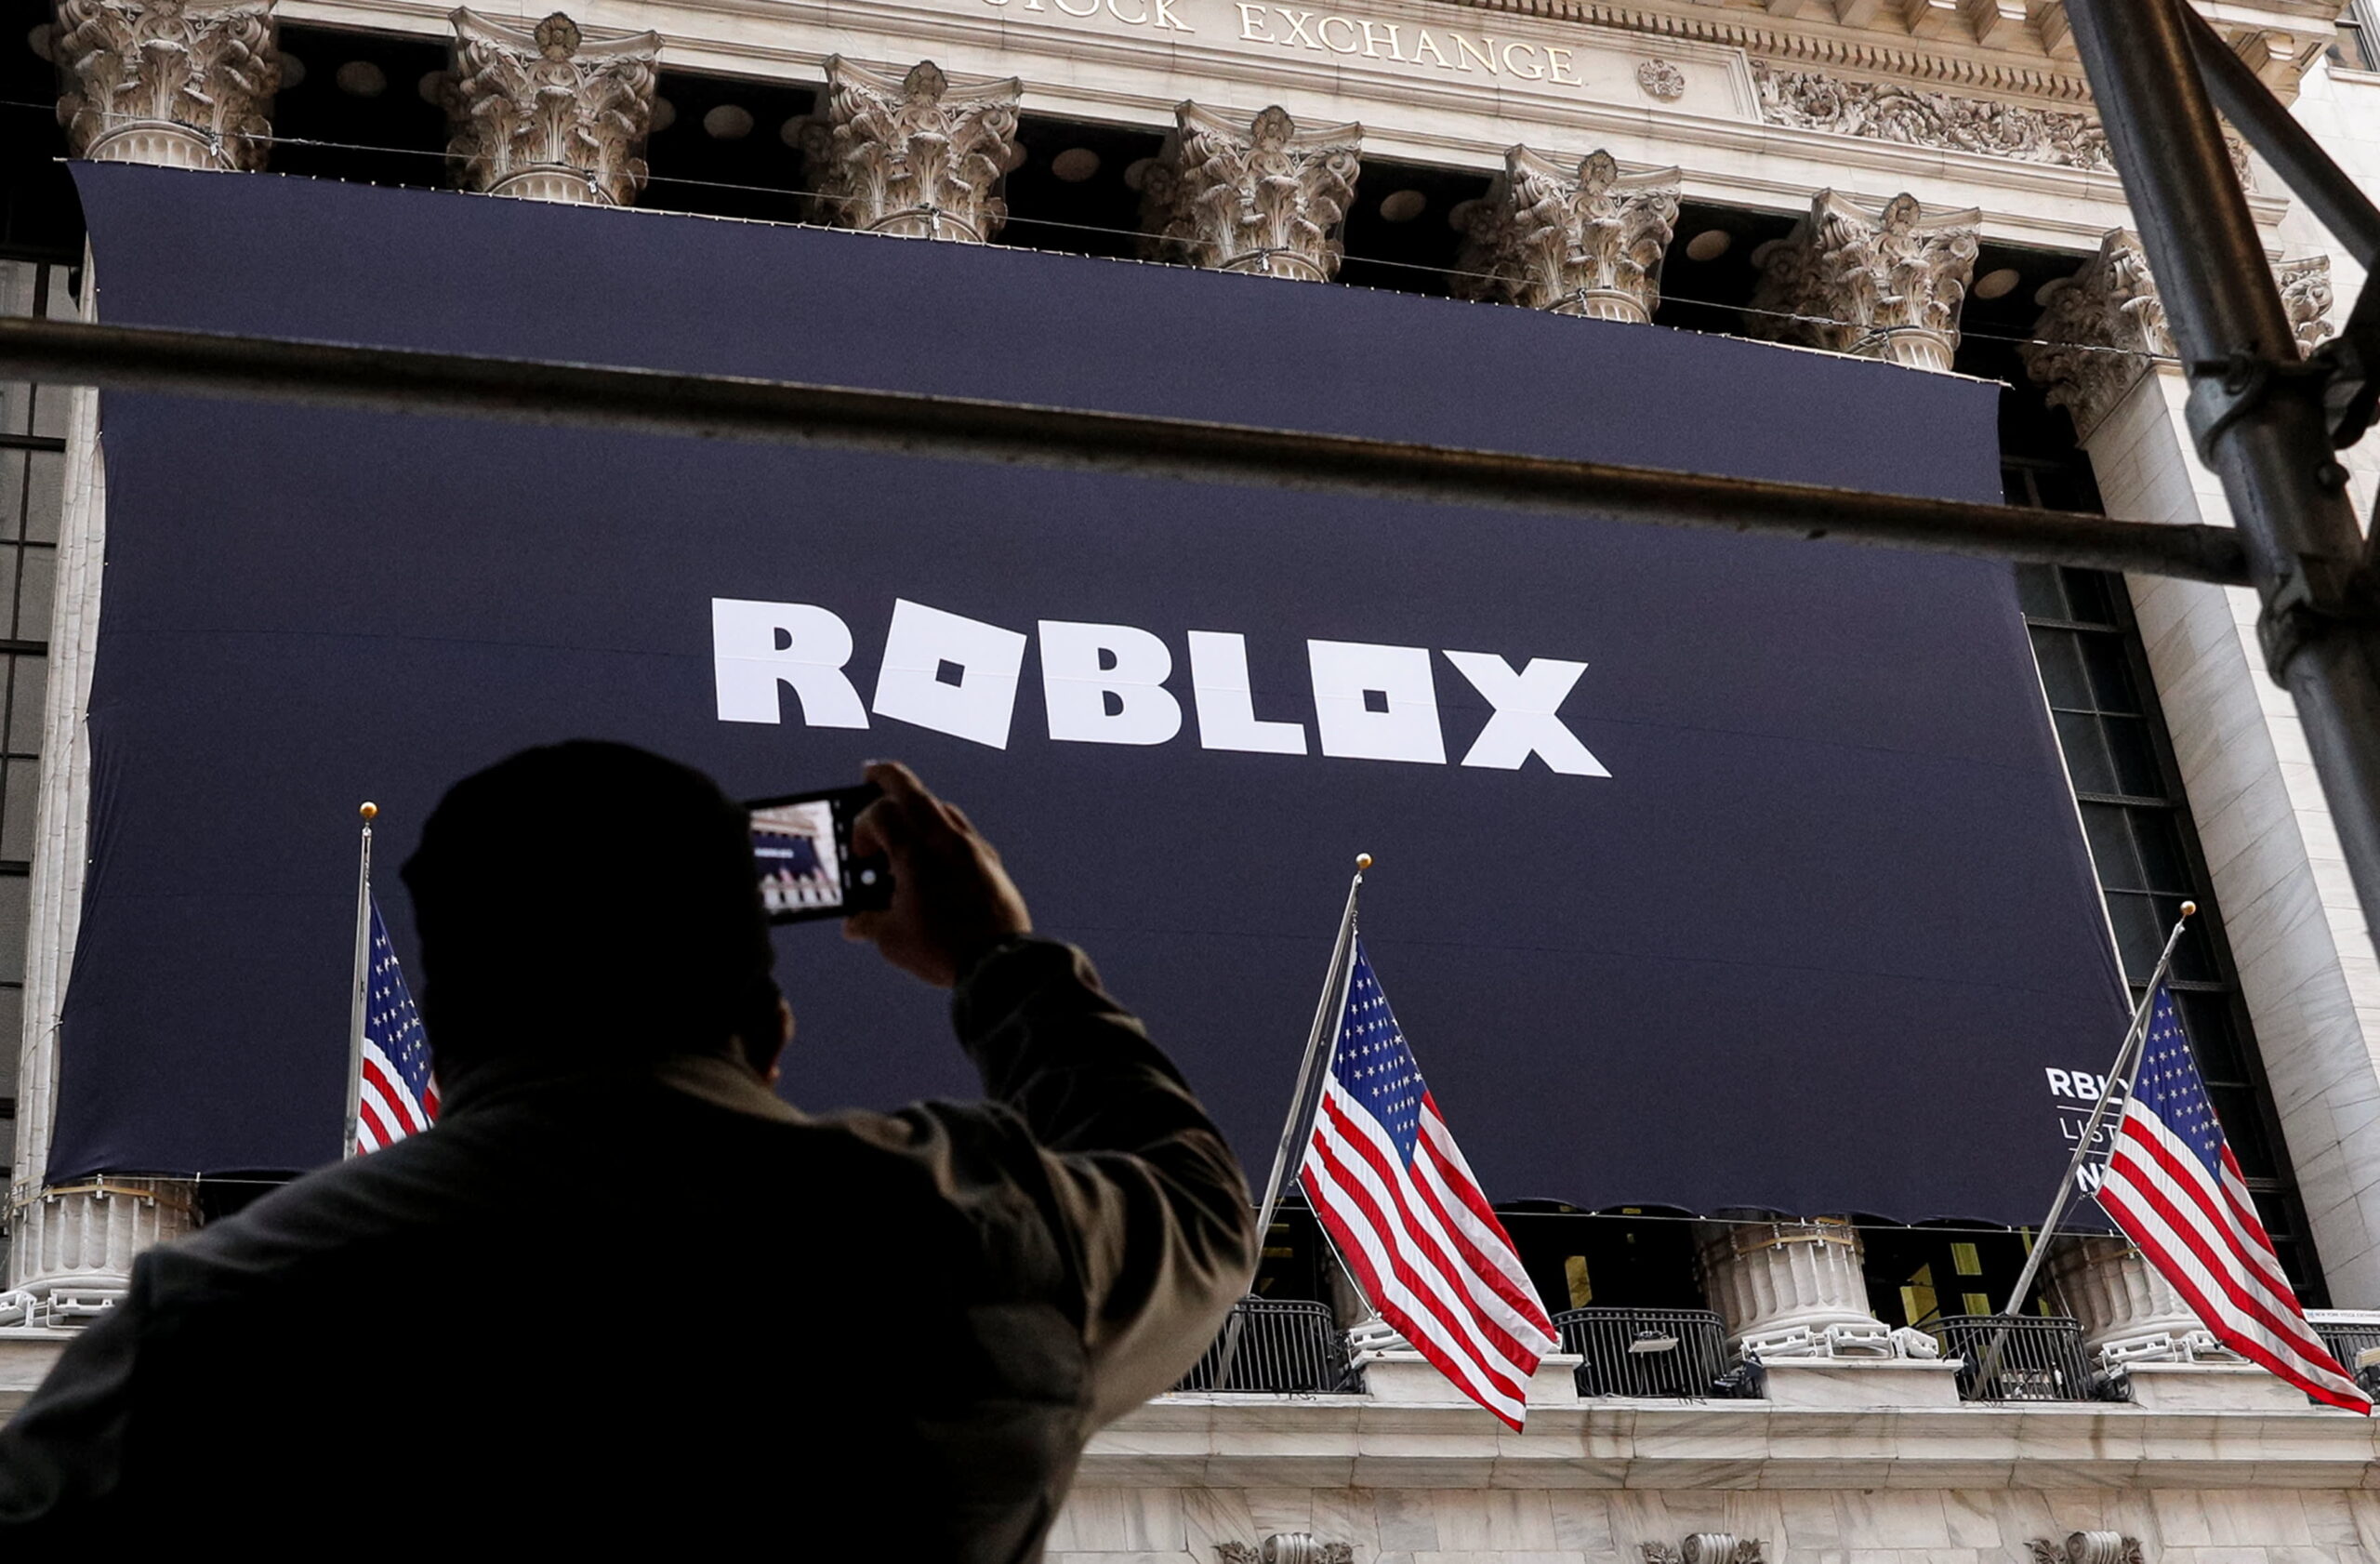 Roblox IPO: A Look at Its Stock Performance